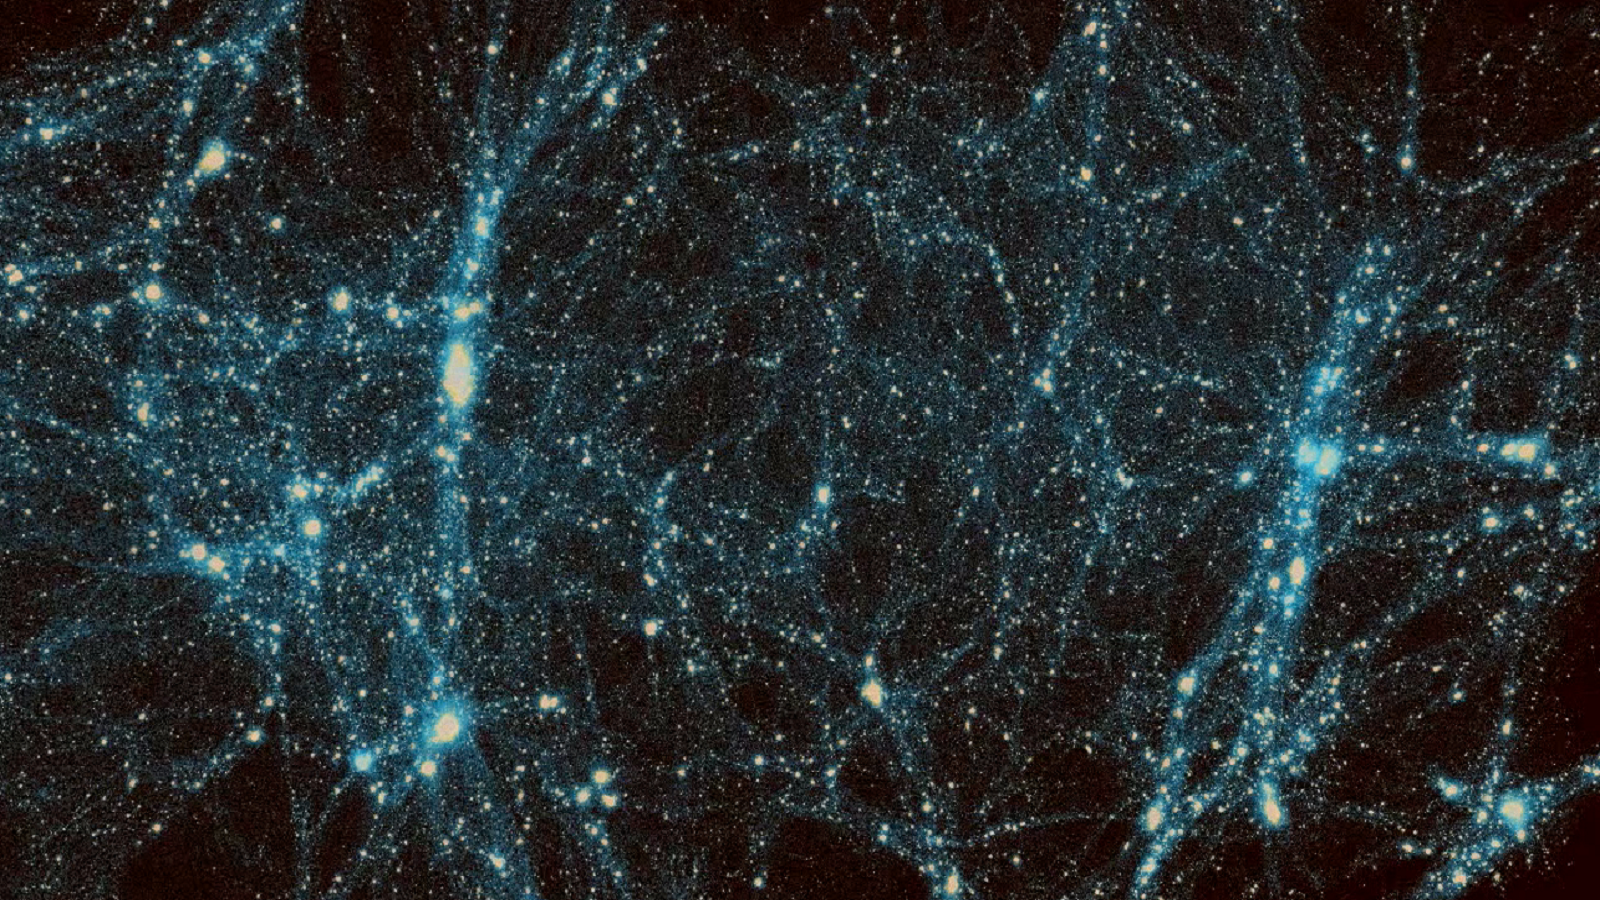 Dark matter distribution from a high-resolution cosmological simulation. On large scales, the density follows a characteristic "cosmic web" pattern; on small scales, high density regions attract normal matter that may host any number of galaxies, depending on the dark matter-dominated region’s mass. (Argonne HACC team [simulation]; Joe Insley and Silvio Rizzi [visualization].)